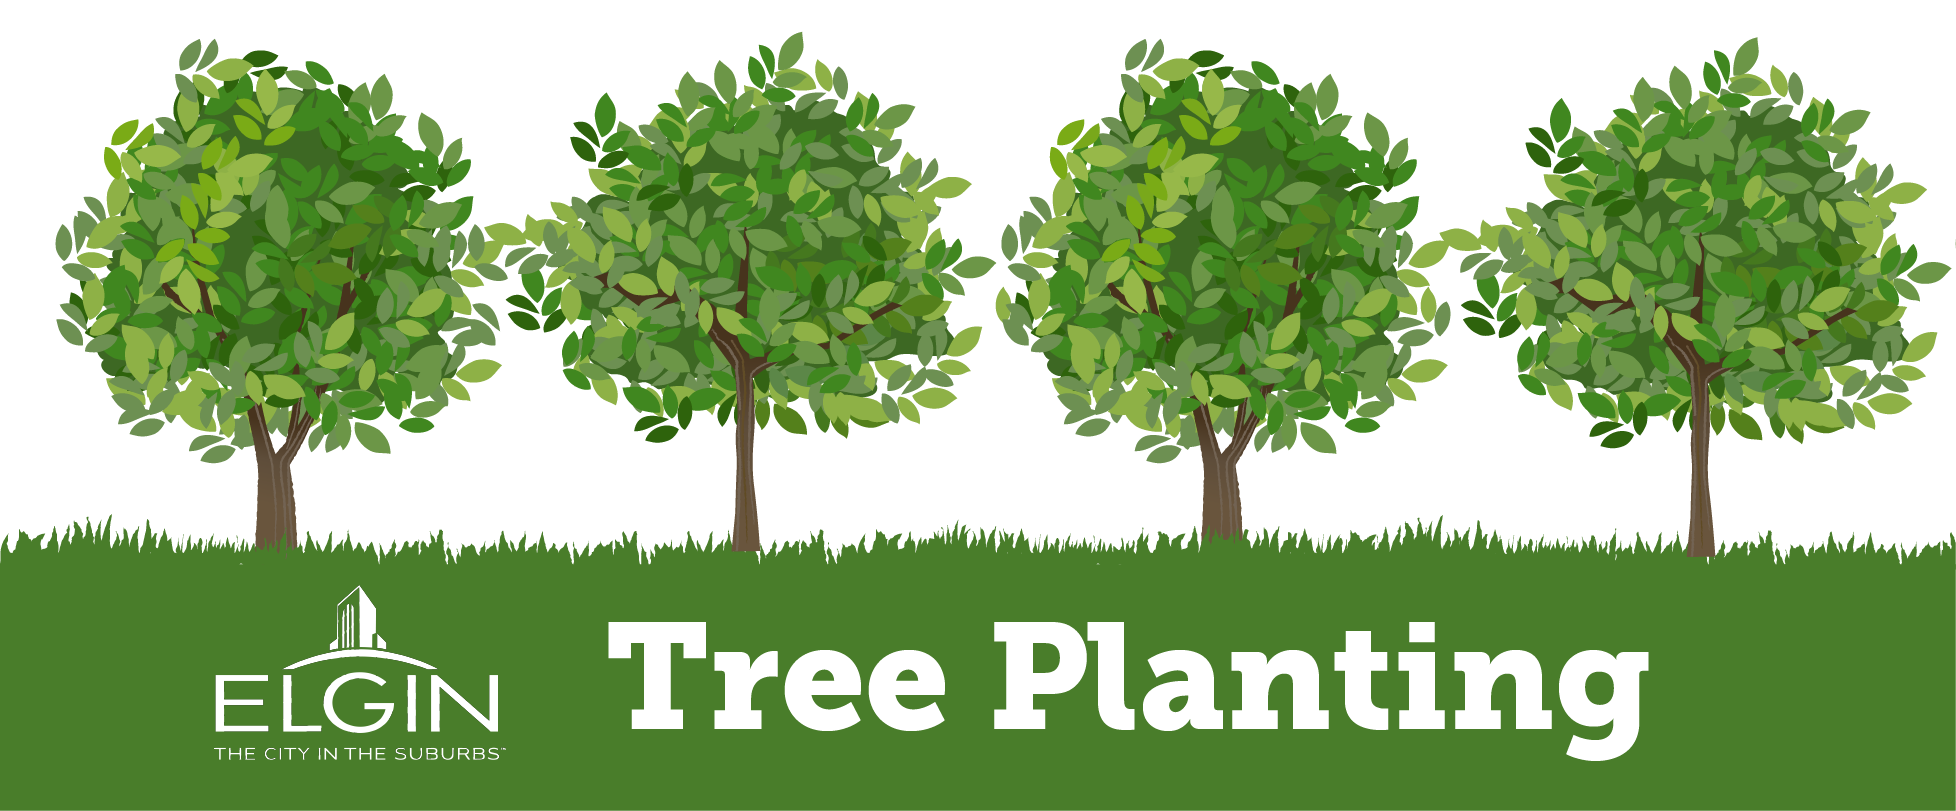 Tree city of elgin. Planting clipart need plant